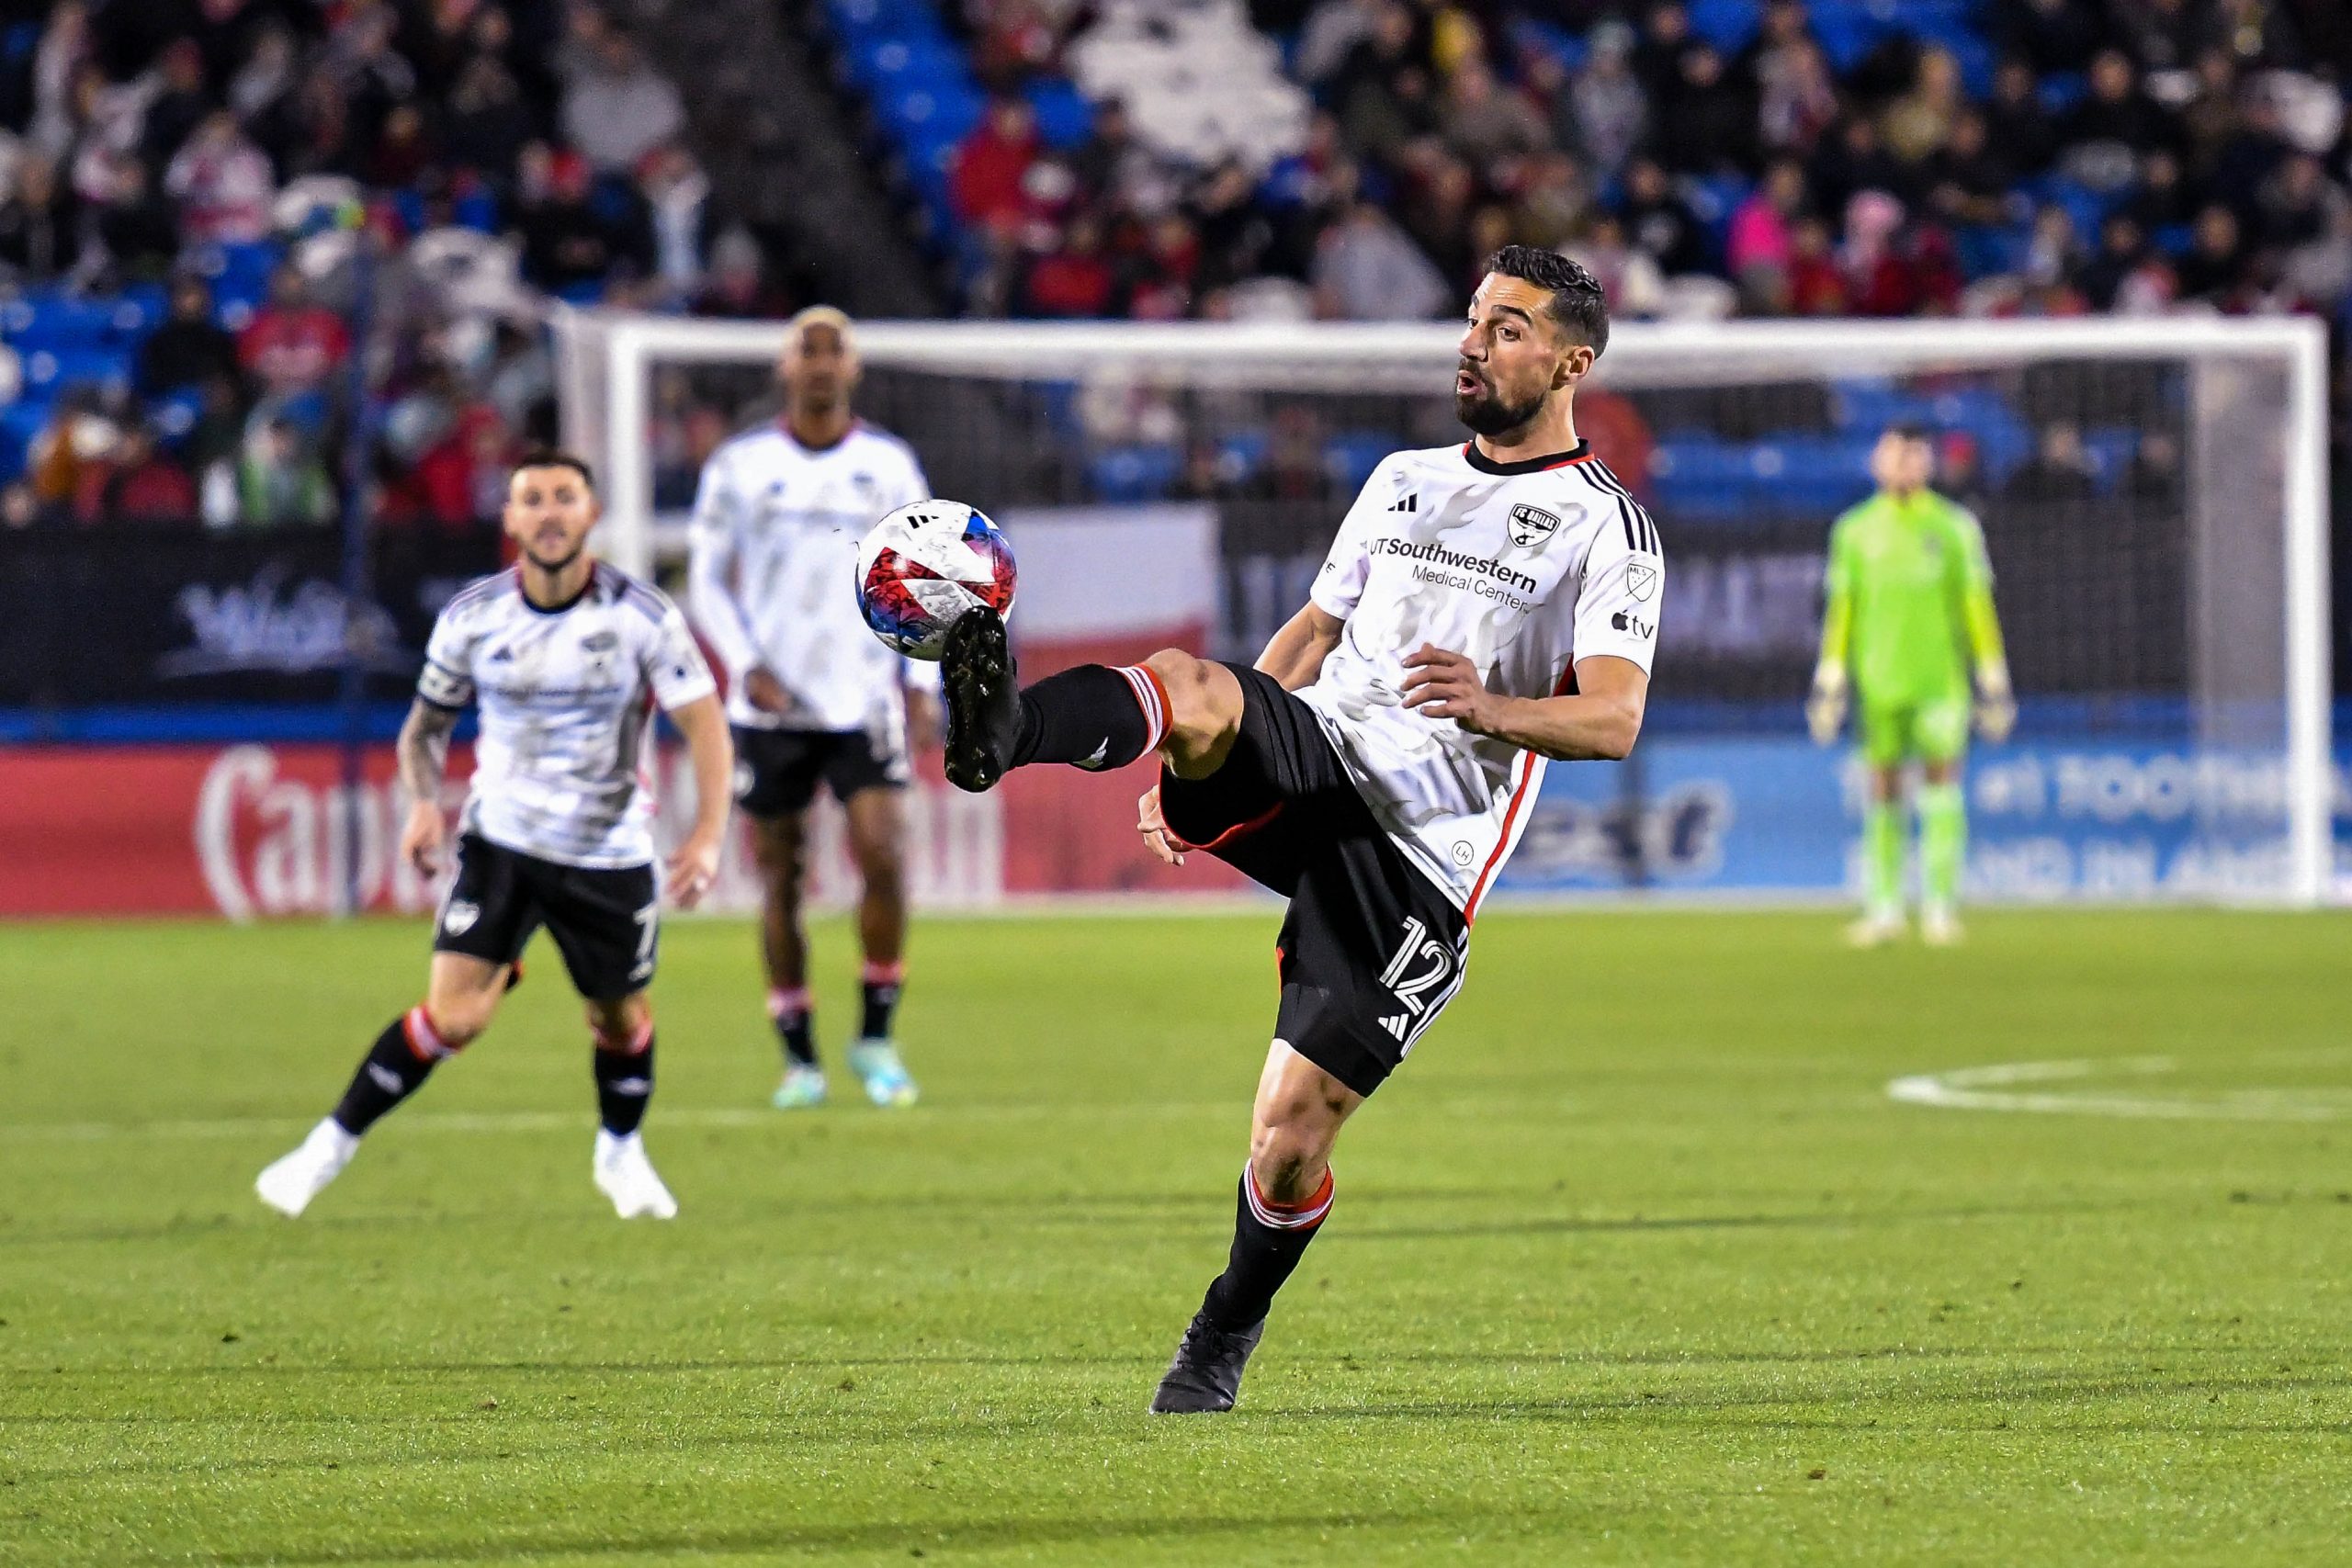 Sebastian Lletget brings the ball down in the MLS match against Sporting KC on Saturday, March 18, 2023, at Toyota Stadium. (Daniel McCullough, 3rd Degree)